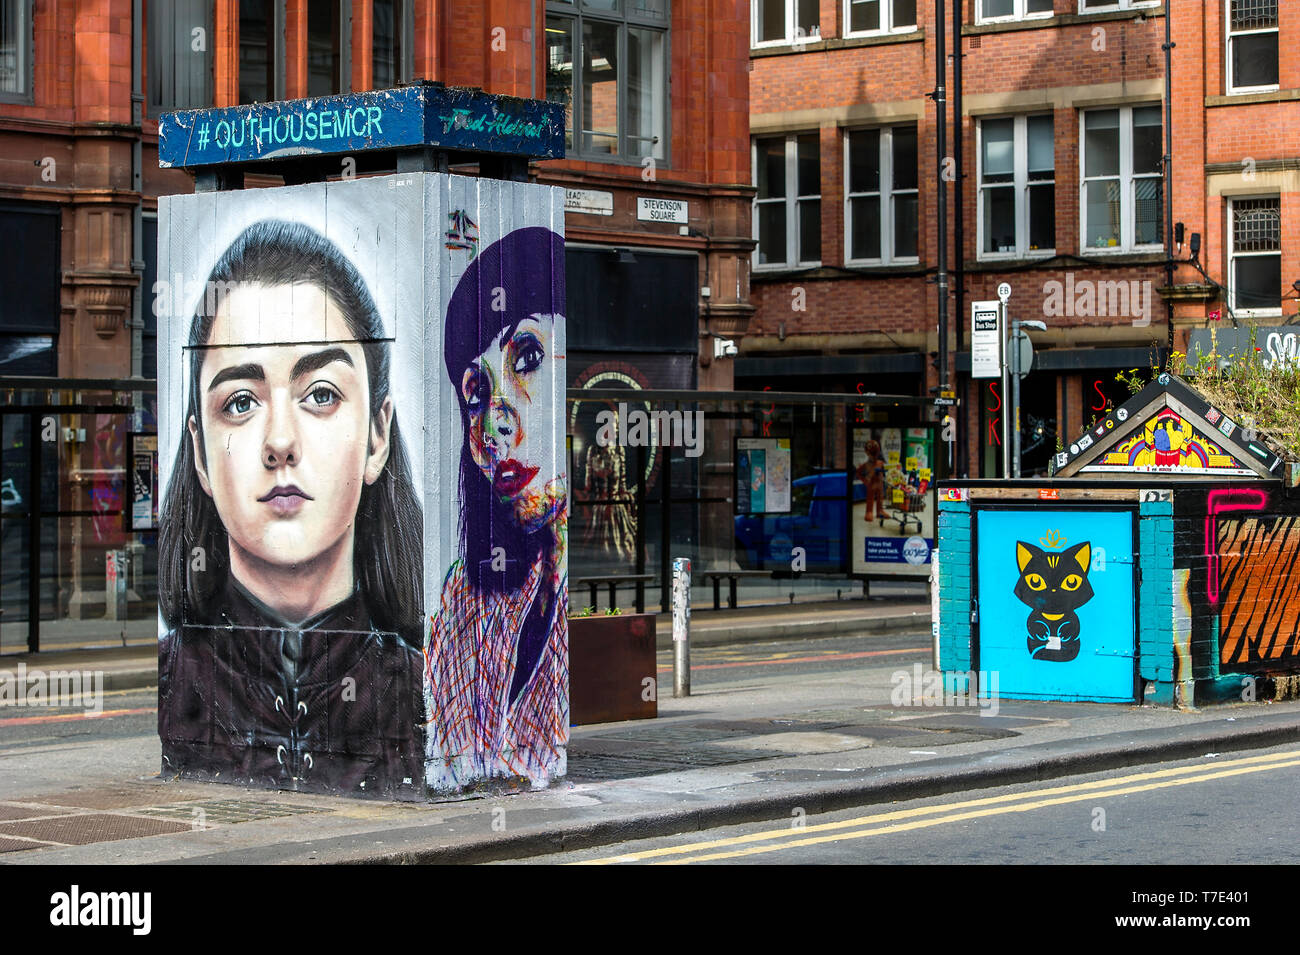 Manchester, UK. 7th May 2019. A new piece of street art has appeared in Stevenson Square in the Northern Quarter of Manchester, UK. The art work depicts the Game of Thrones character Arya Stark, played by actress Maisie Williams, and was created by artist Akse, the French-born street artist who has been living and working in Manchester since 1997. It's all part of outdoor public art project Outhouse MCR, which oversees the street art-rich part of the city centre. Credit: Paul Heyes/Alamy Live News Stock Photo